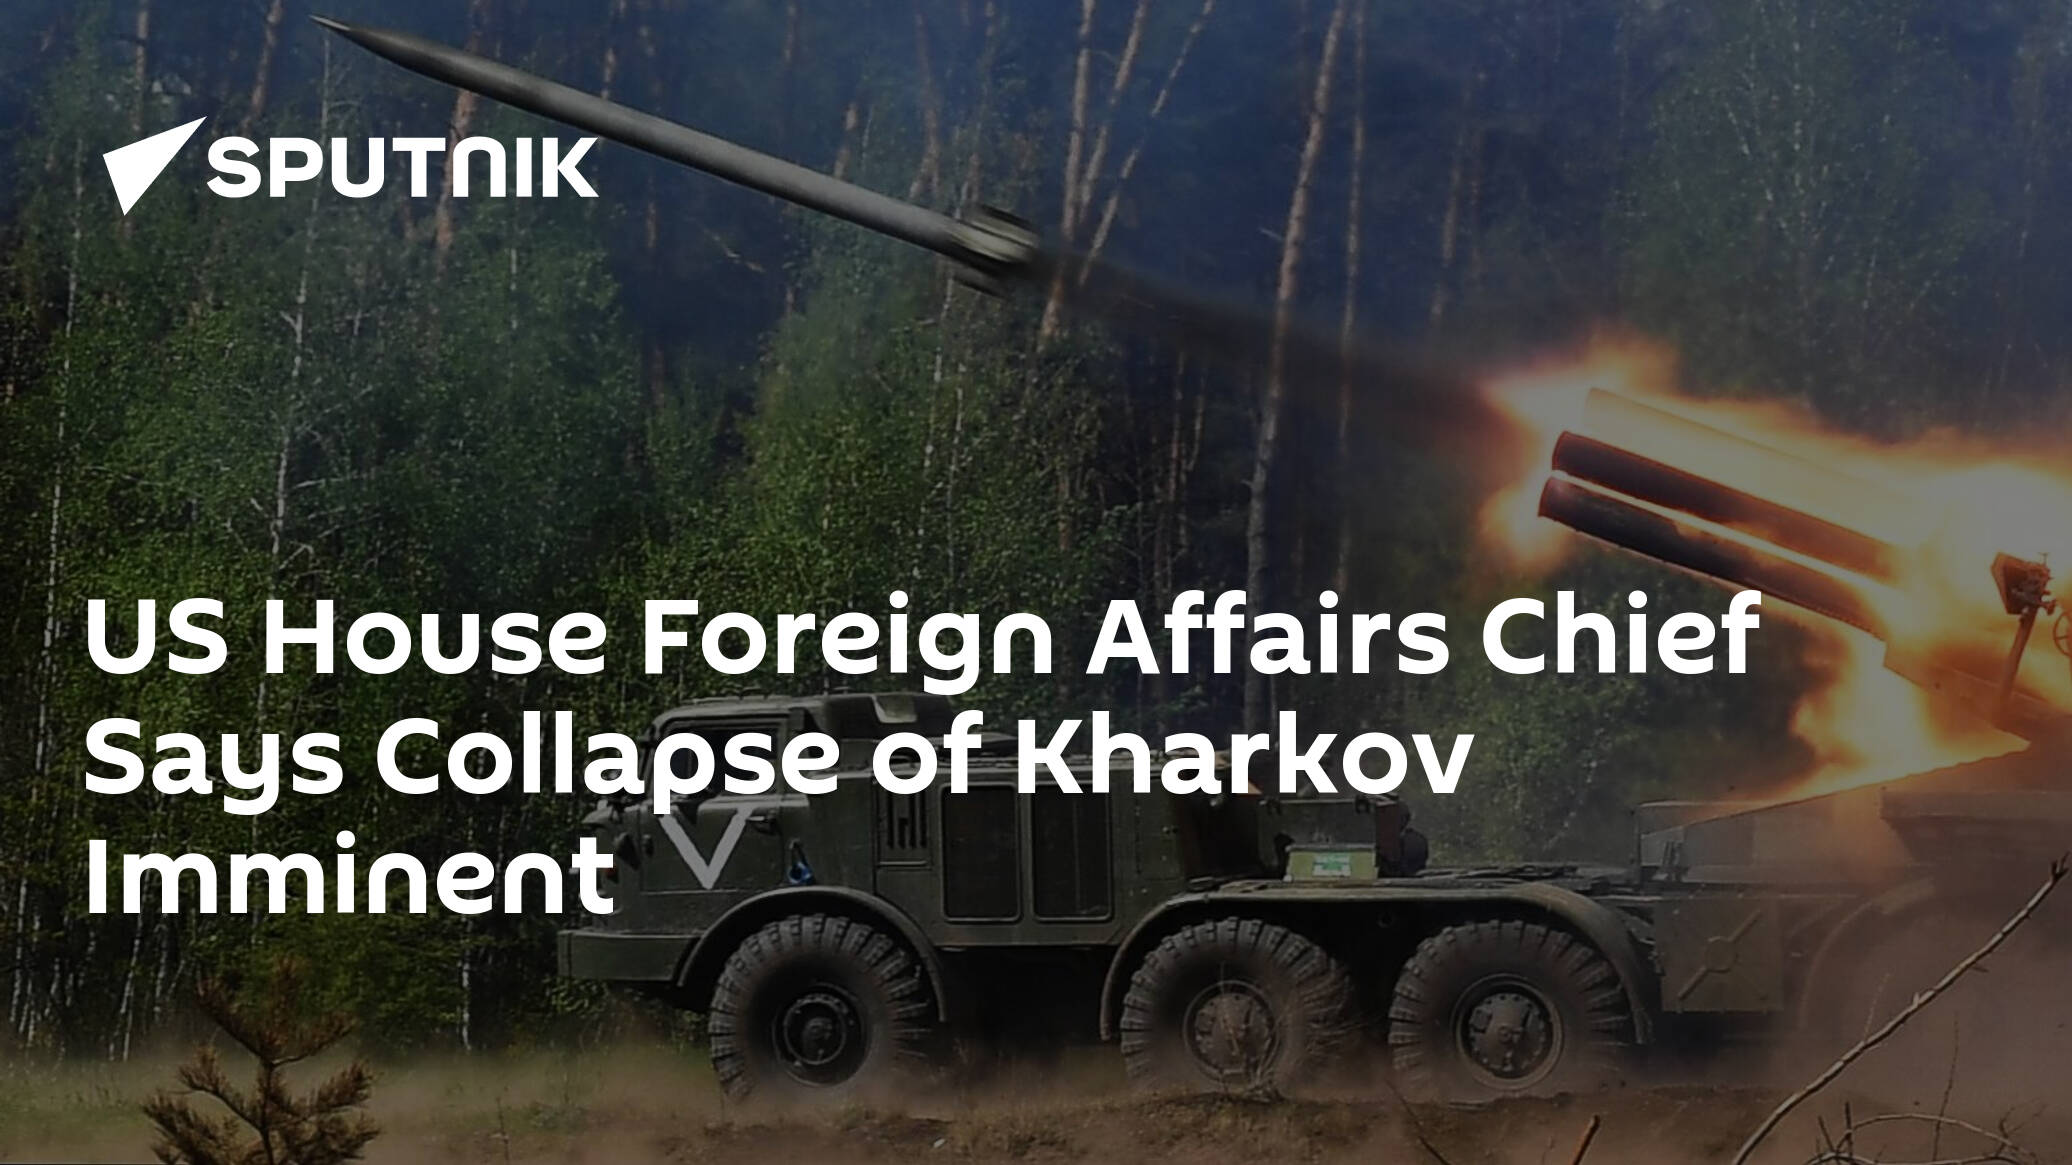 US House Foreign Affairs Chief Says Collapse of Kharkov Imminent